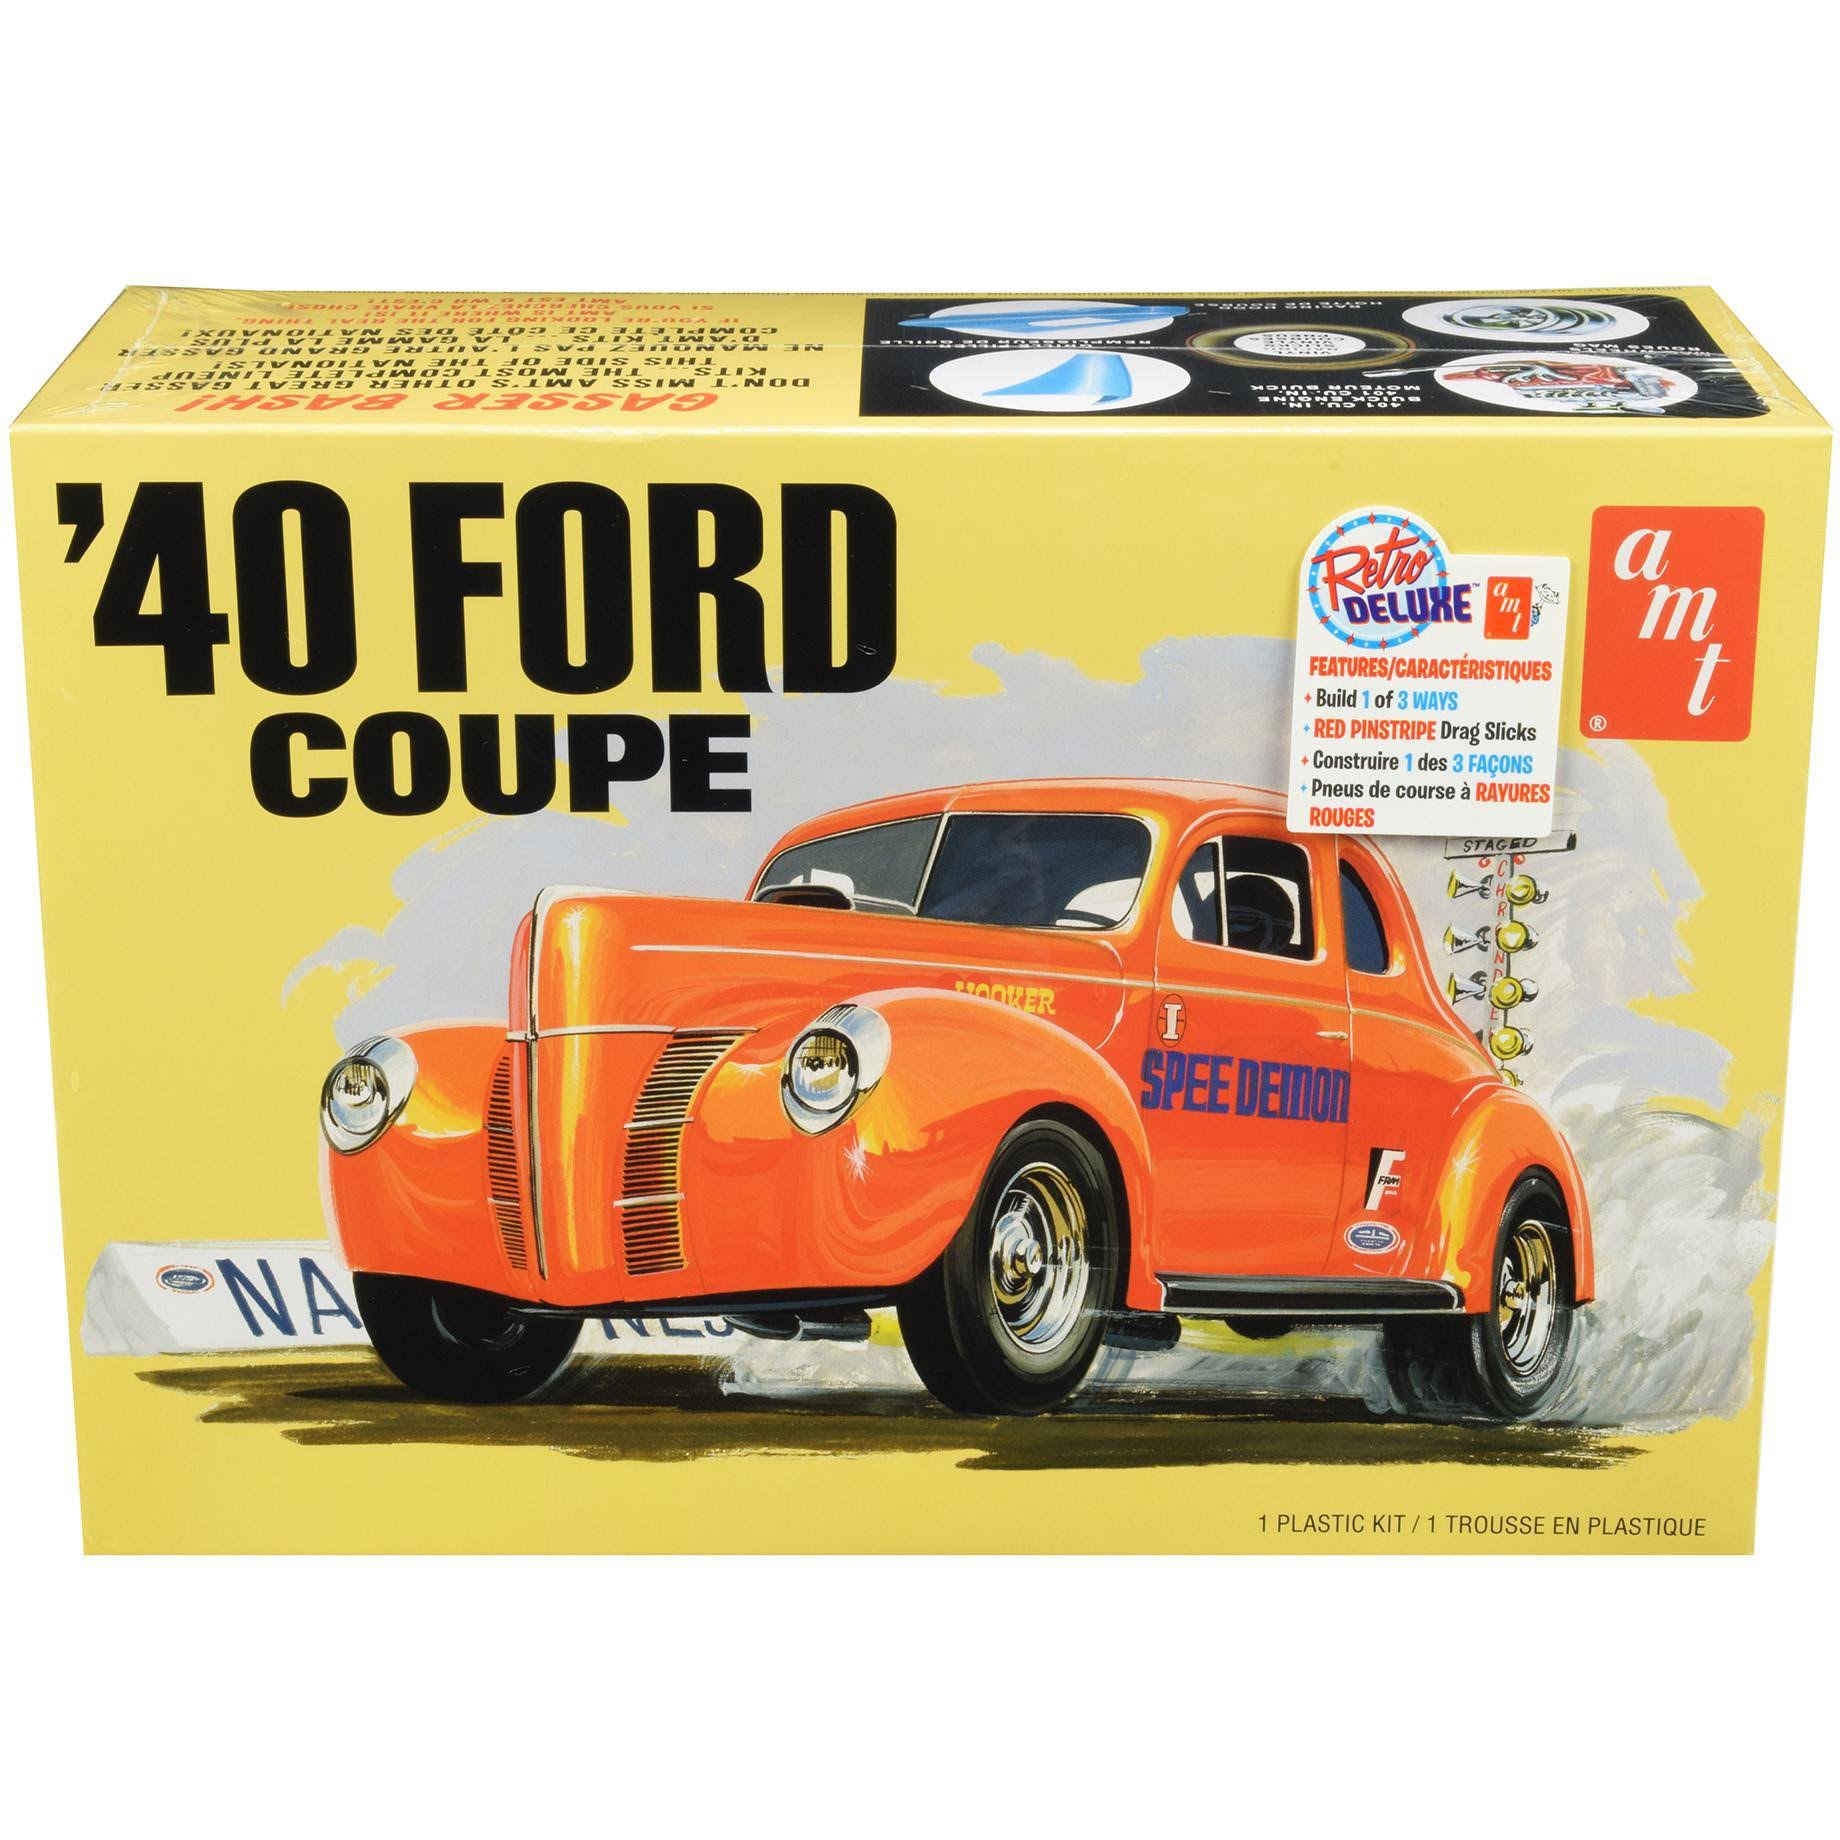 AMT 1940 Ford Coupe "Trophy Series" kit